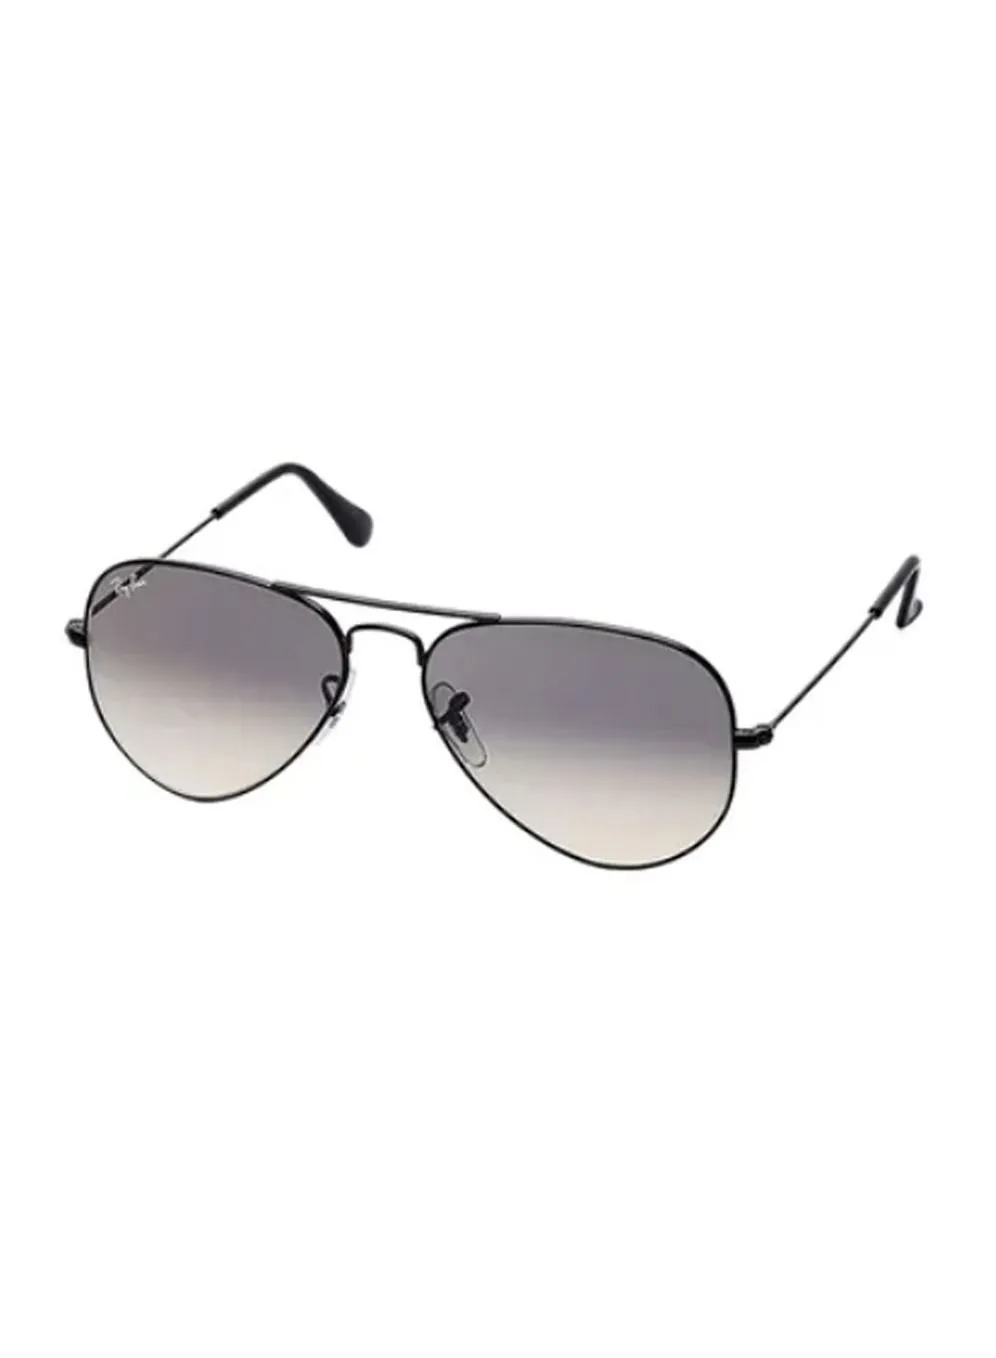 Ray-Ban Gradient Aviator Sunglasses - Lens Size: 58 mm RB3025 002 32/58